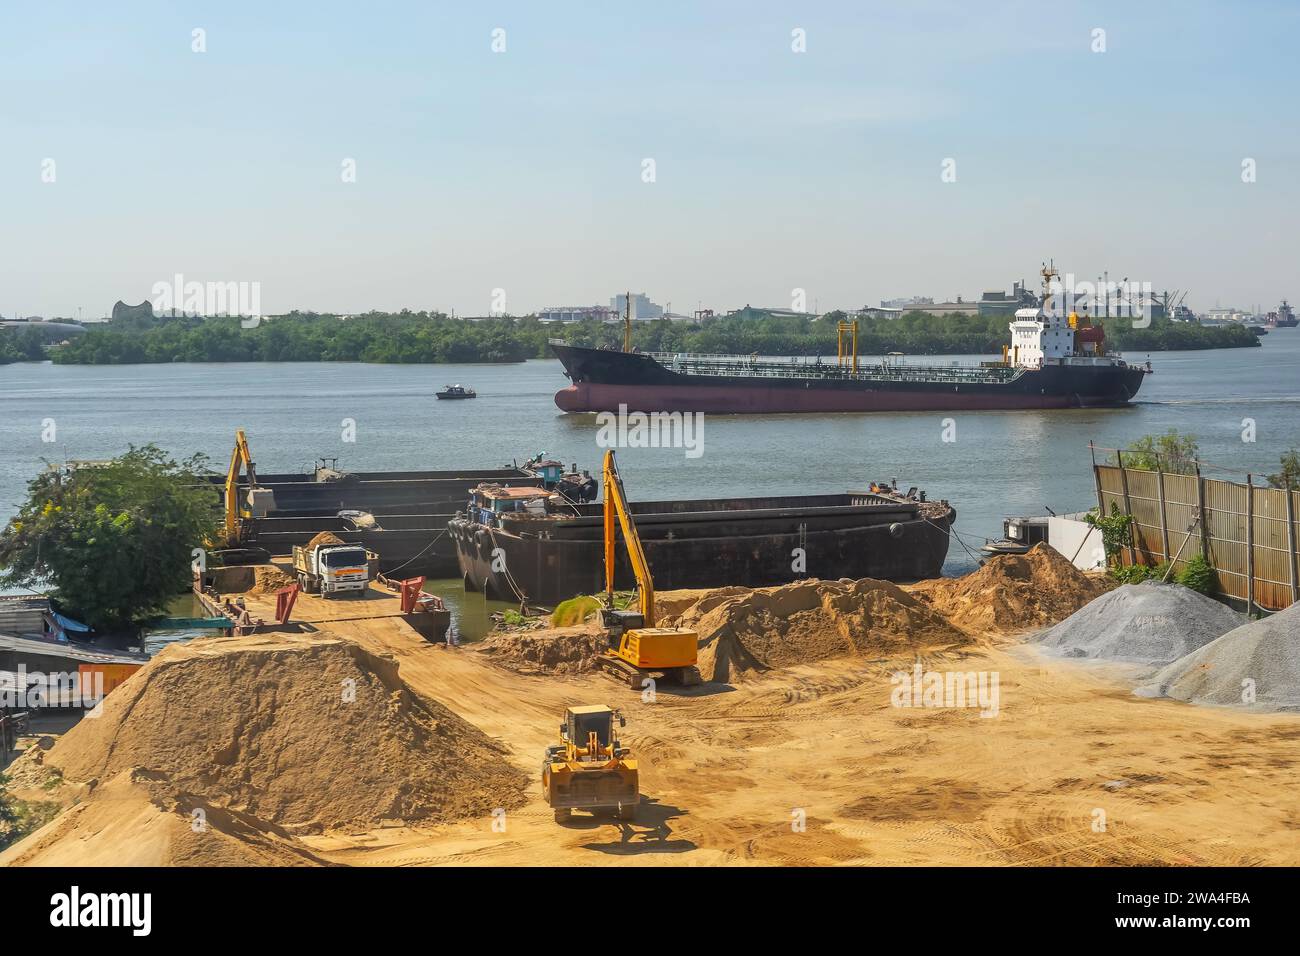 Excavator is loaded into a river vessel barges sand soil transportation of construction materials and materials along the river. Oil tanker floats nea Stock Photo